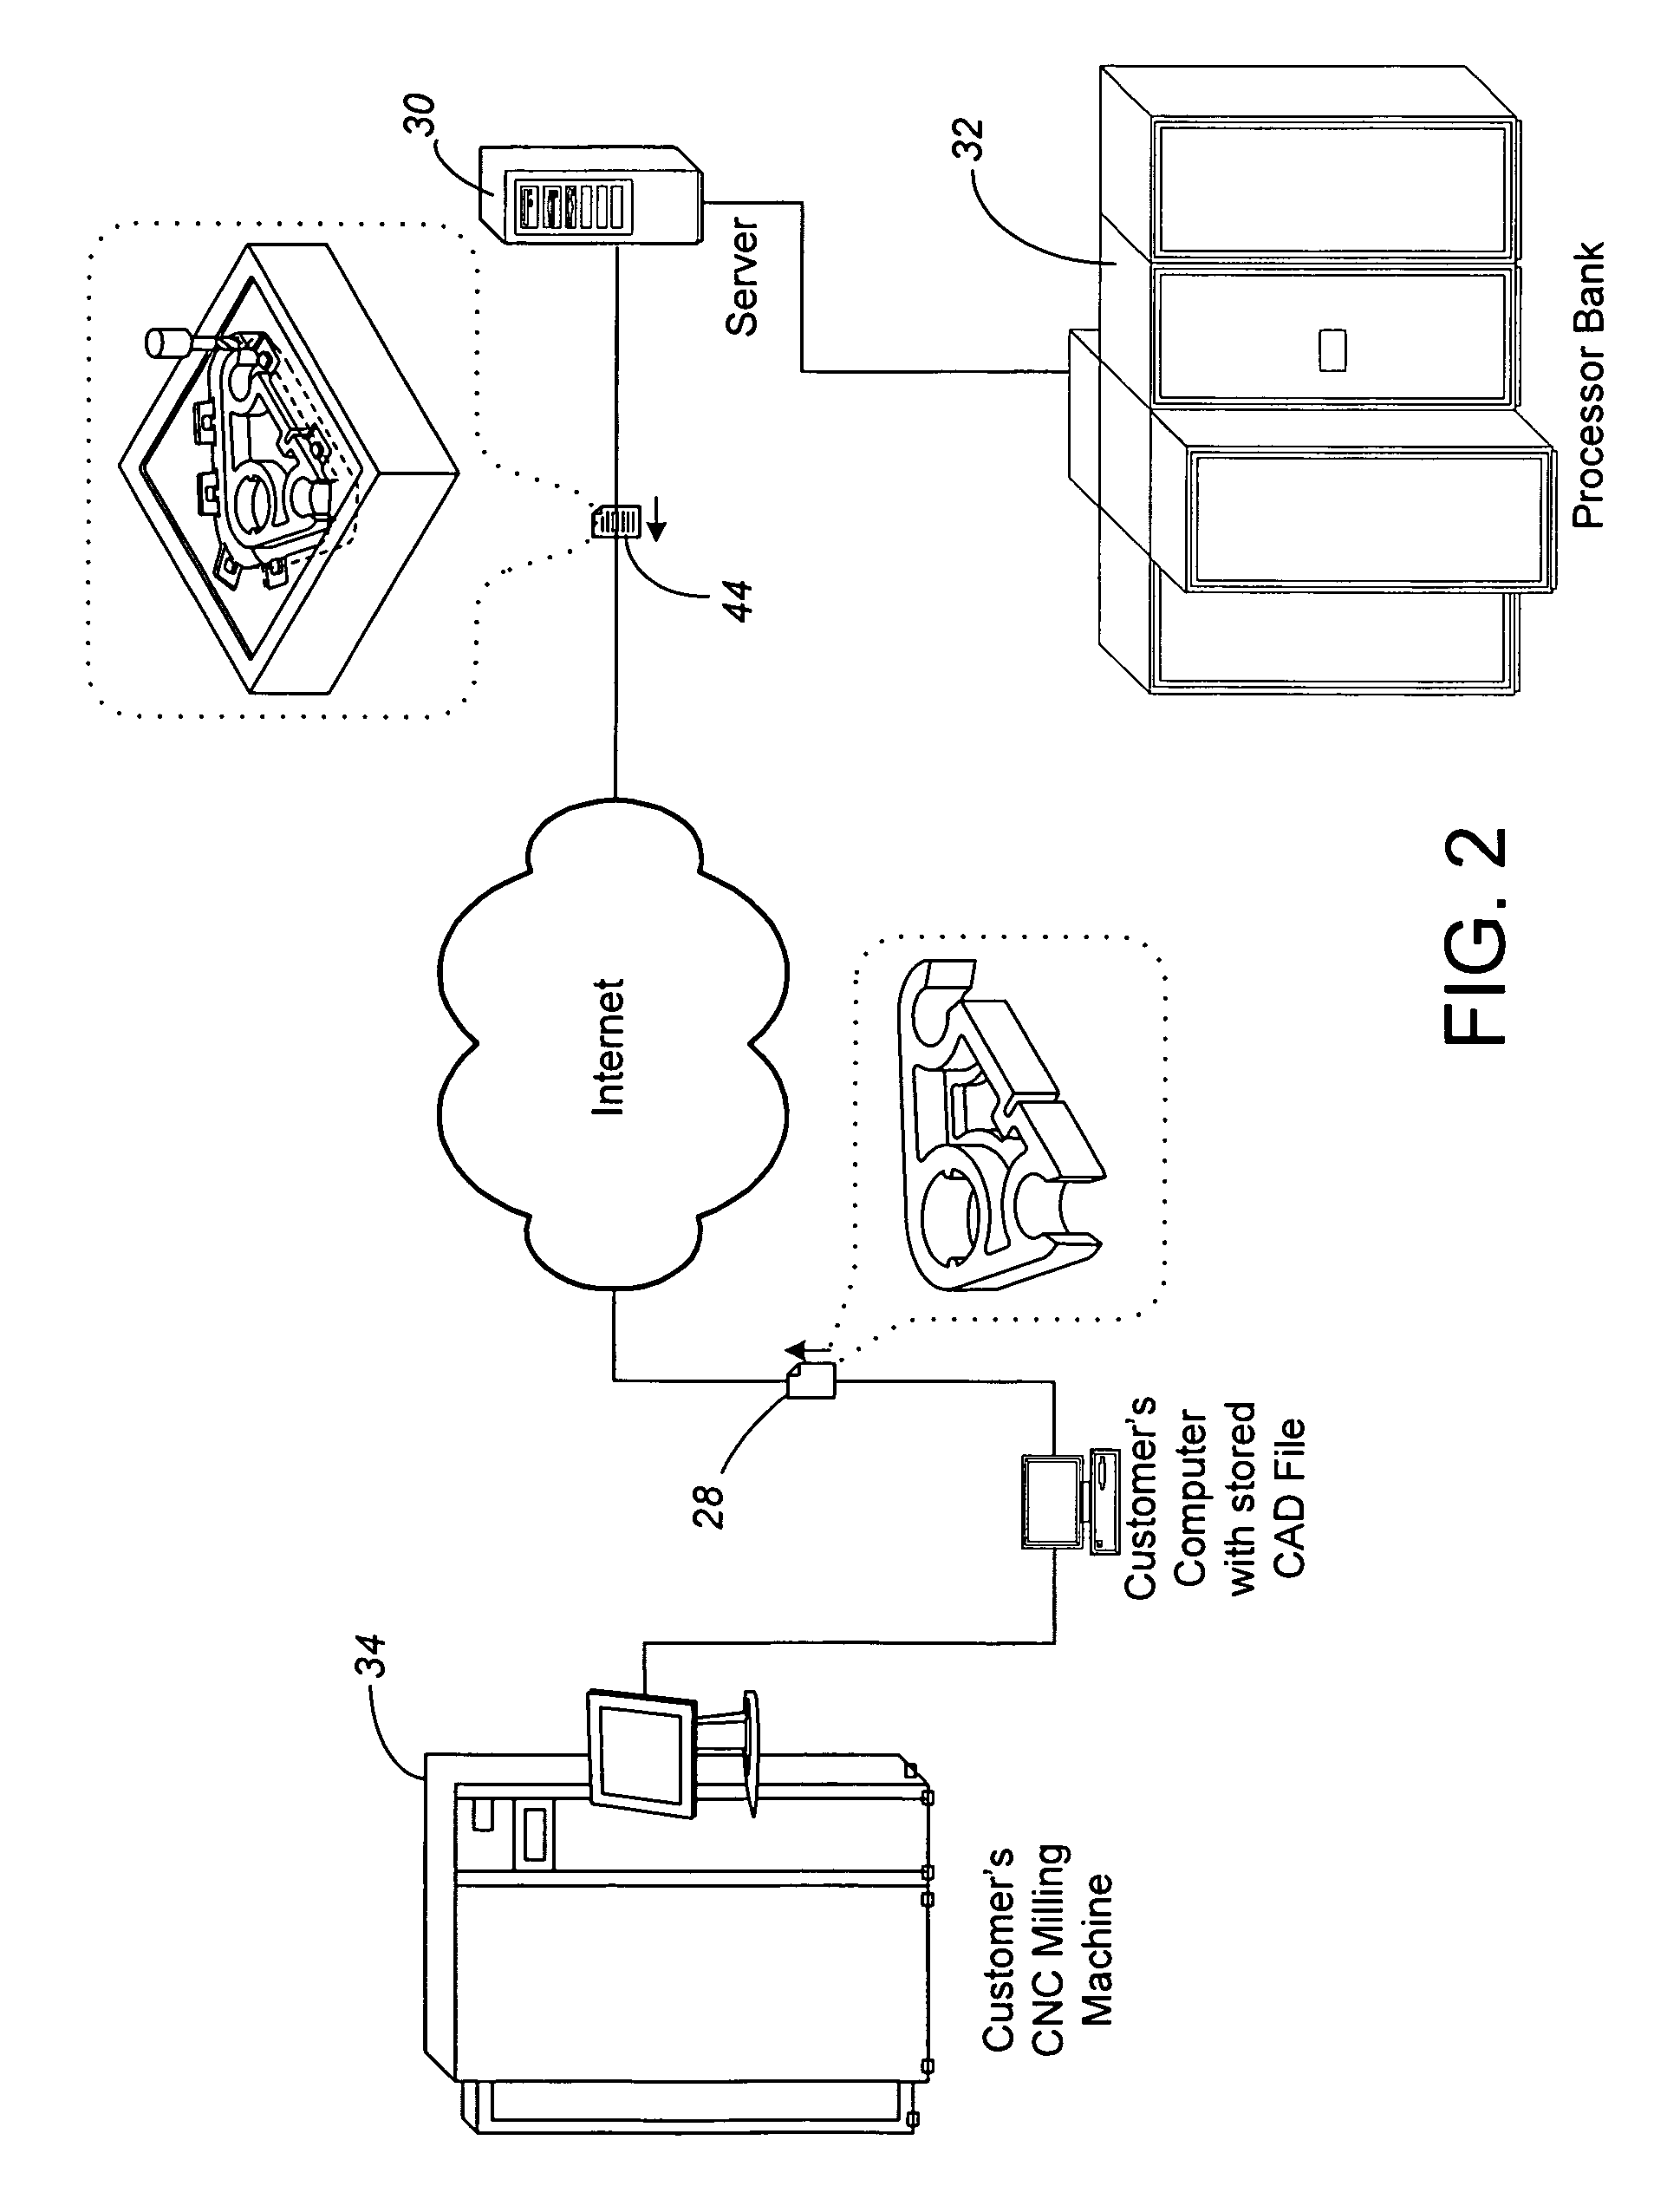 CNC instructions for solidification fixturing of parts